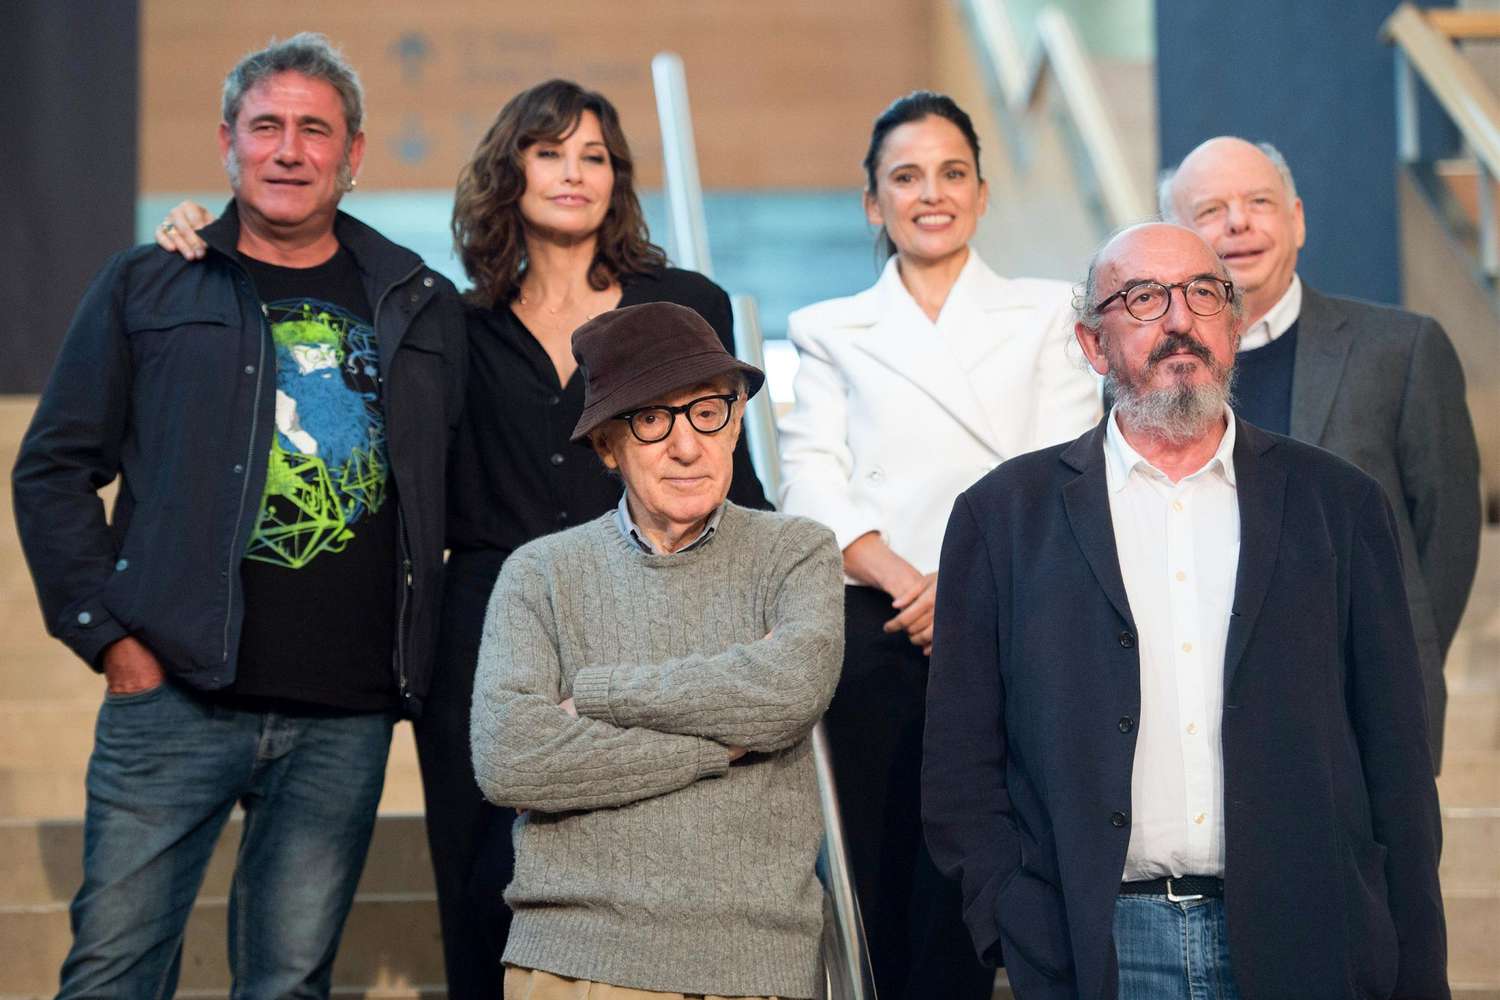 US director Woody Allen (front L) and Mediapro chief executive officer Jaume Roures (frint R) pose with (back L-R) Spanish actor Sergi Lopez, US actress Gina Gershon, Spanish actress Elena Anaya and US actor Wallace Shawn pose during a photocall in the northern Spanish Basque city of San Sebastian, where he will start shooting his yet-untitled next film, on July 9, 2019. (Photo by ANDER GILLENEA / AFP) (Photo credit should read ANDER GILLENEA/AFP/Getty Images)